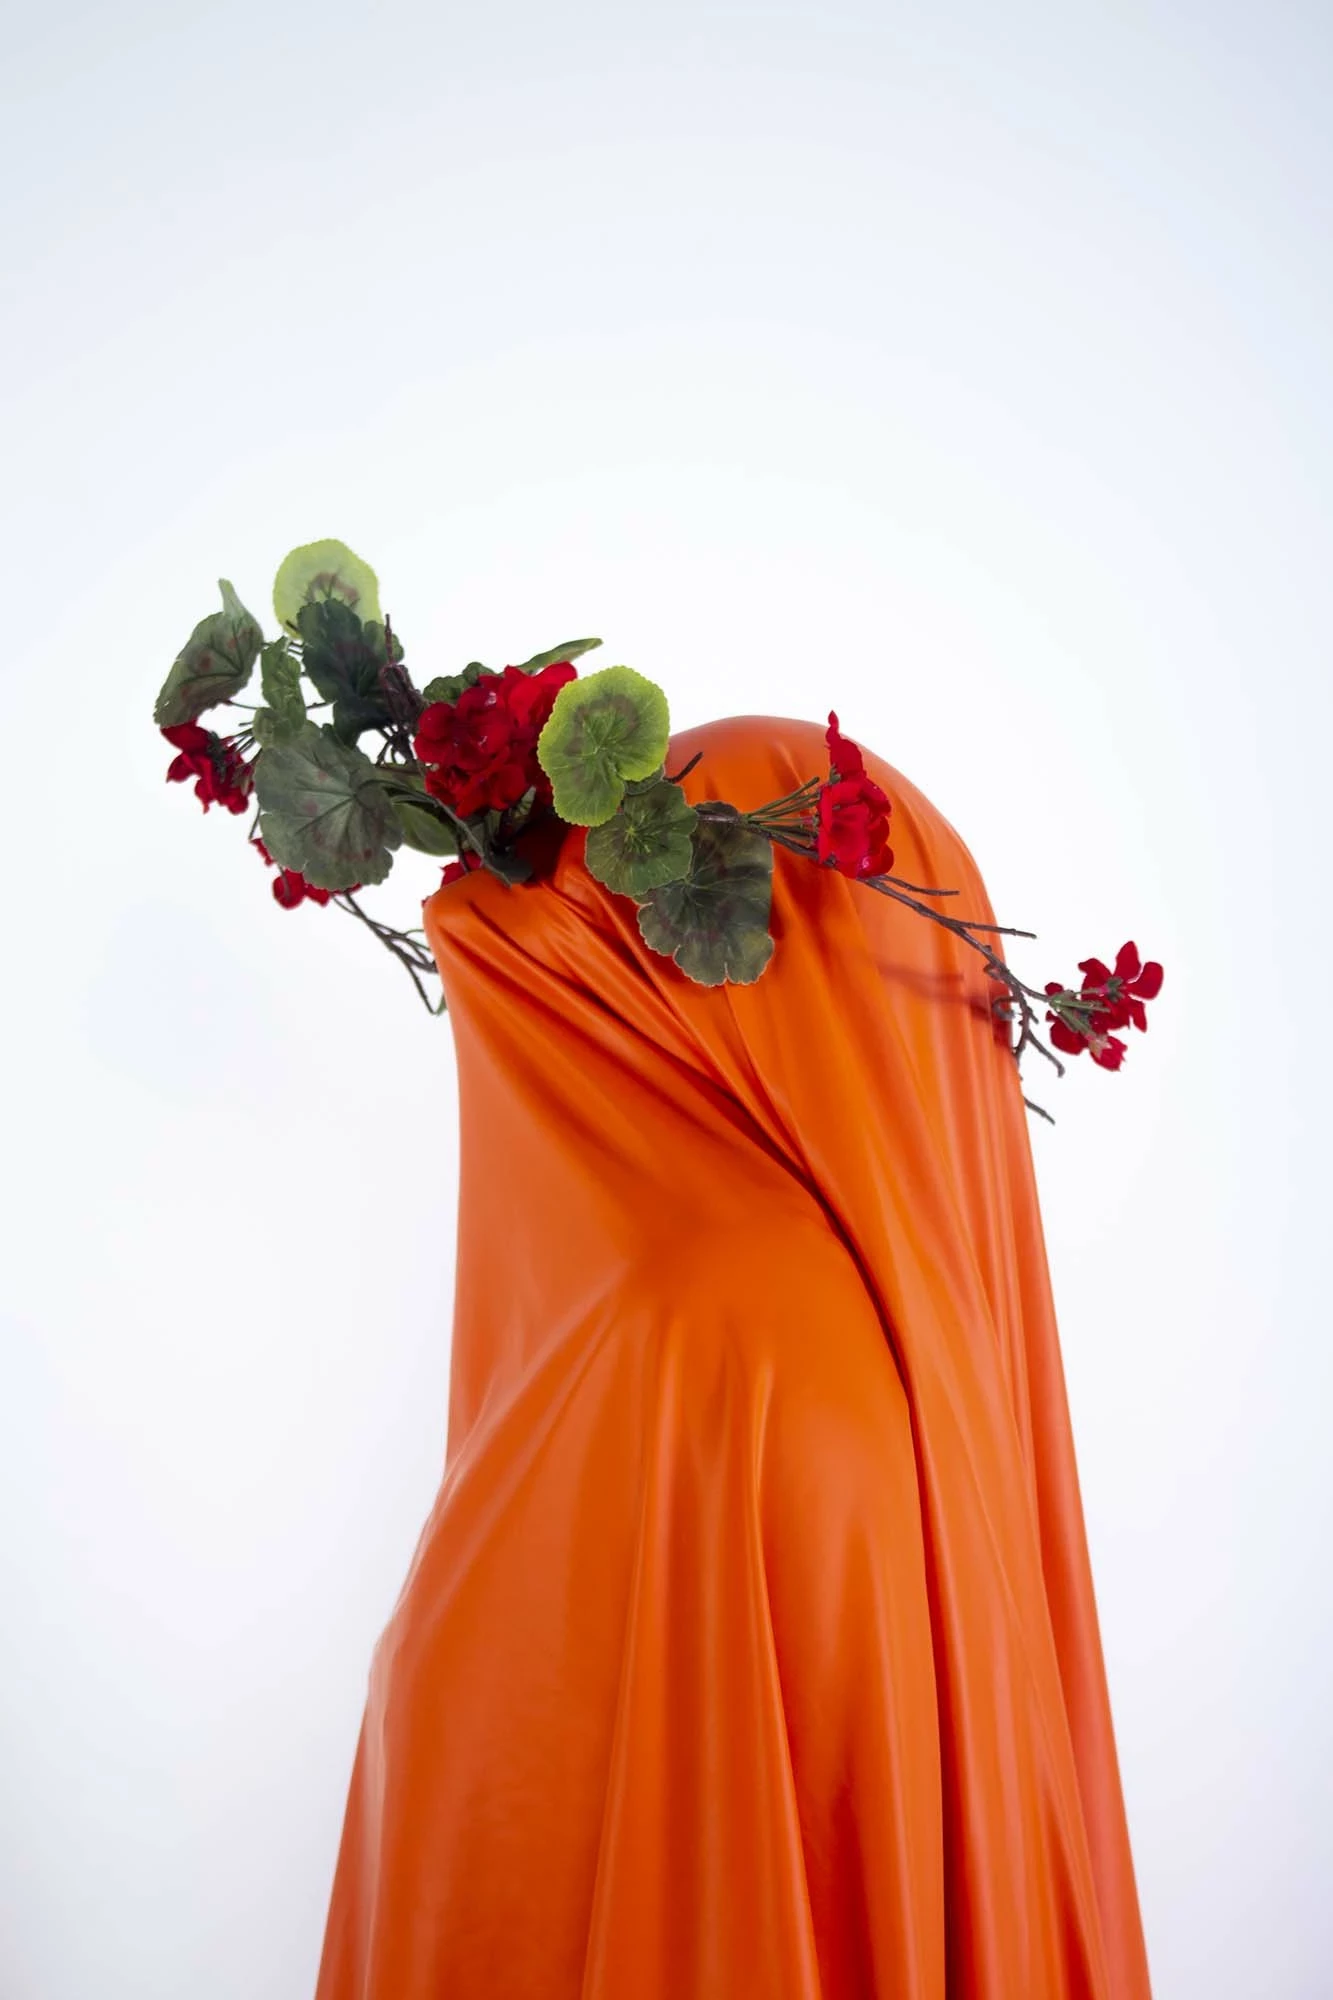 person under orange fabric with flowers